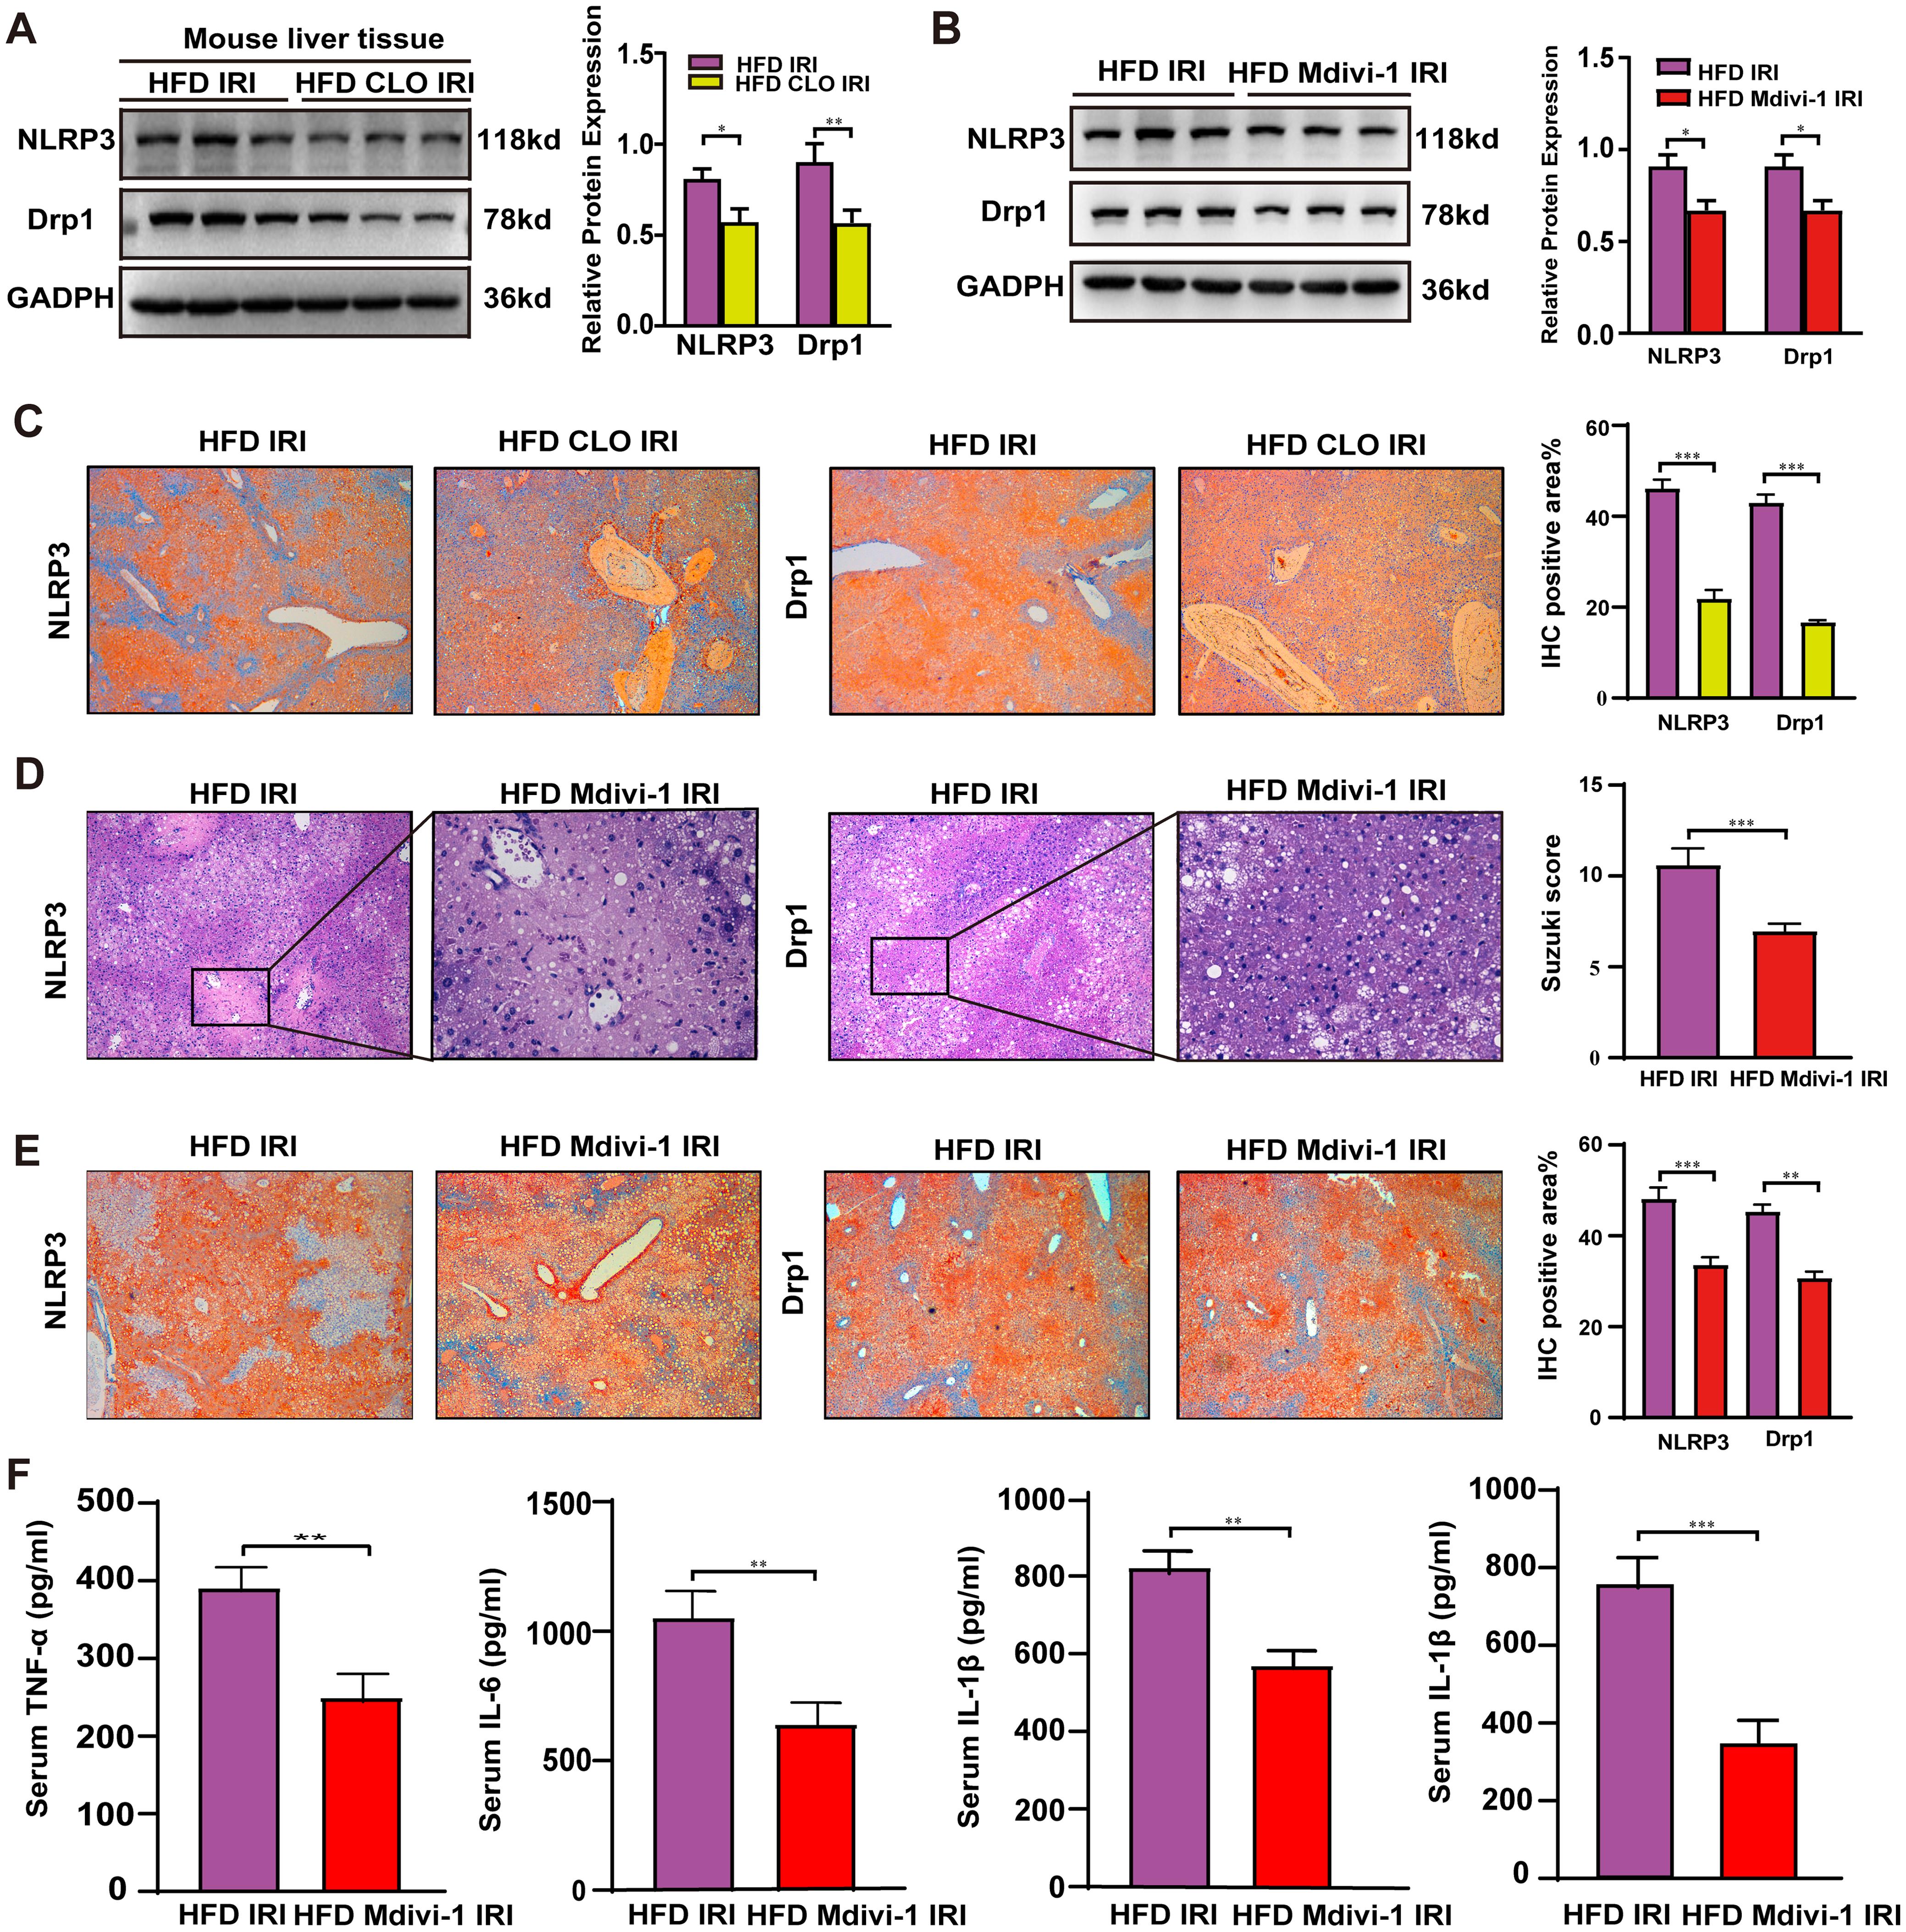 Inhibition of Drp1 down-regulated NLRP3 expression and reduce IRI in hepatic steatosis.